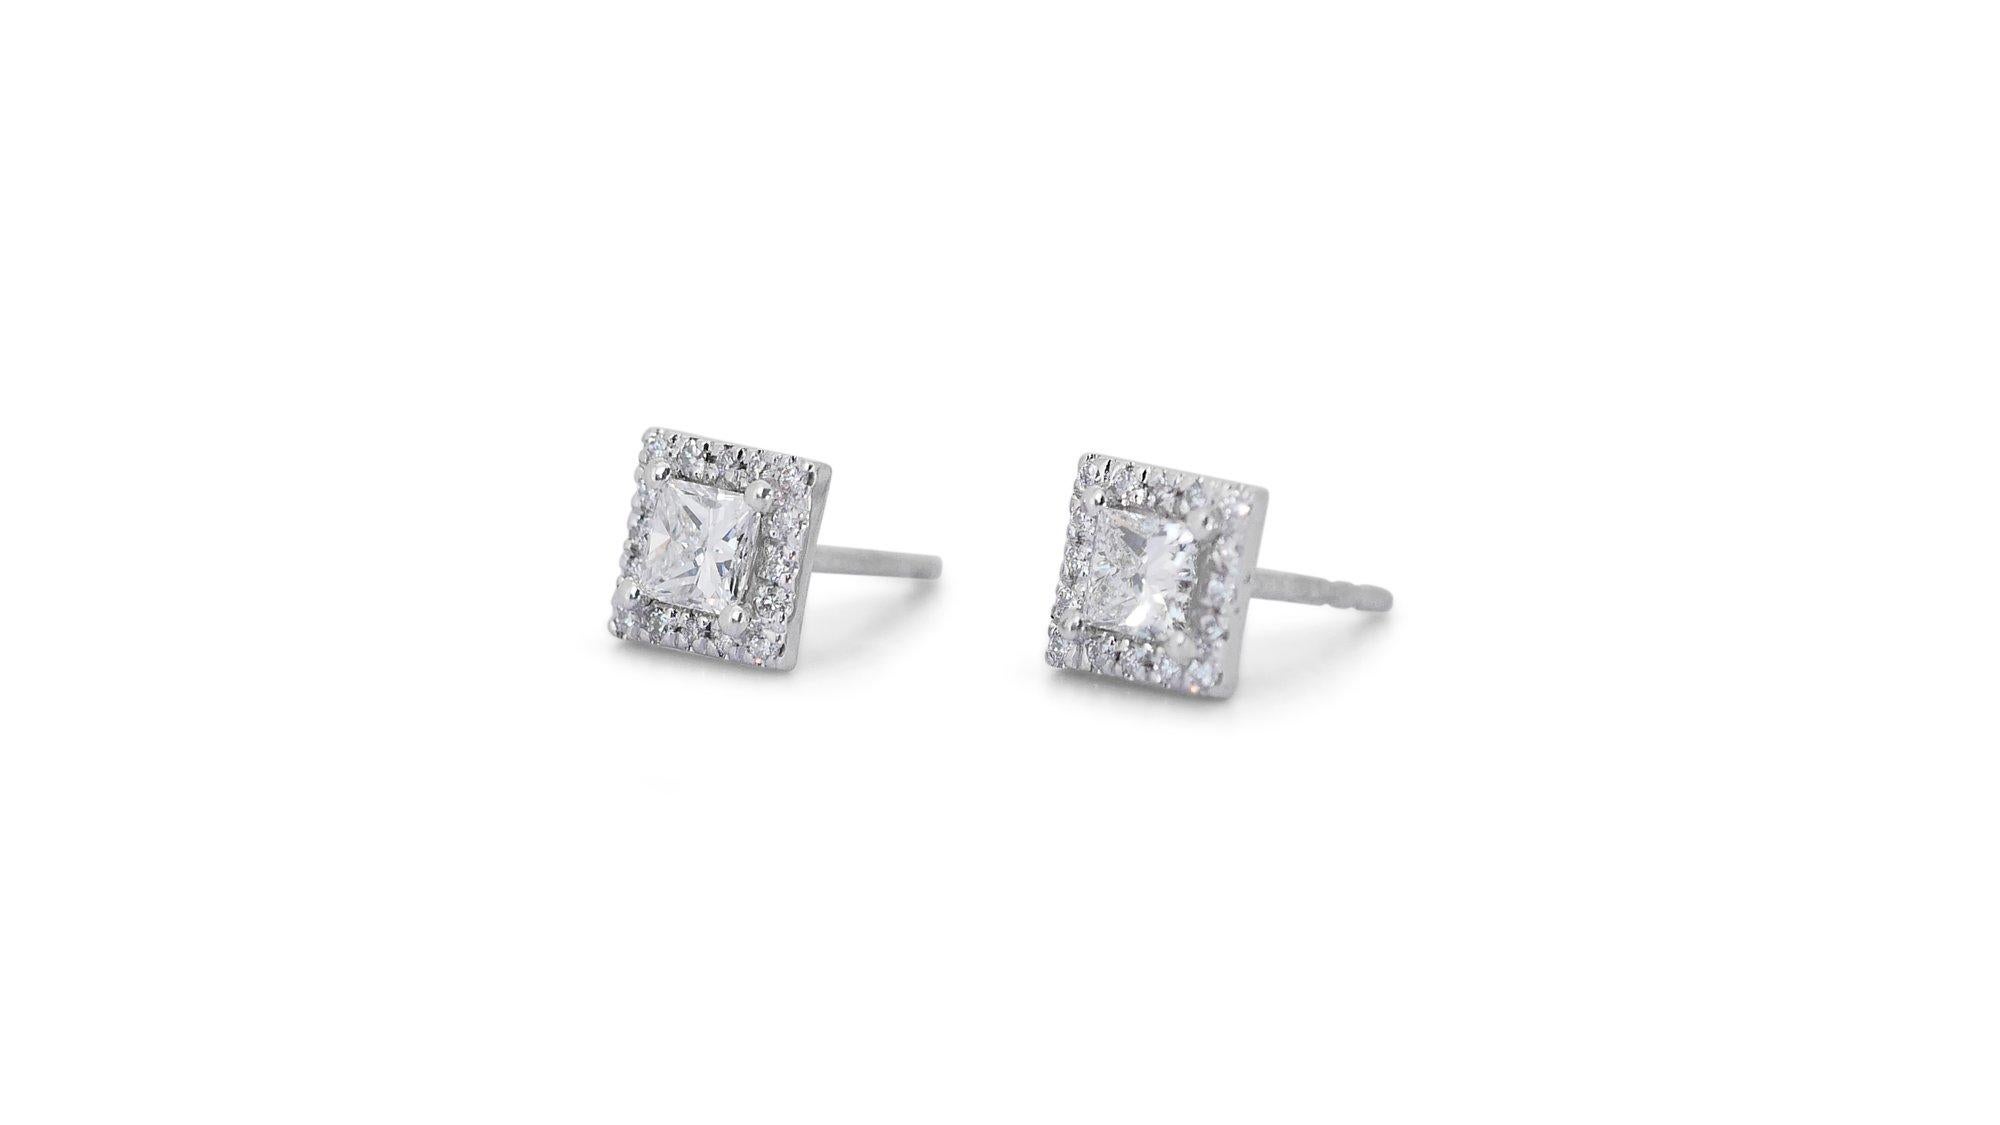 Square Cut Stunning 2.37ct Diamond Stud Earrings in 18k White Gold - GIA Certified For Sale